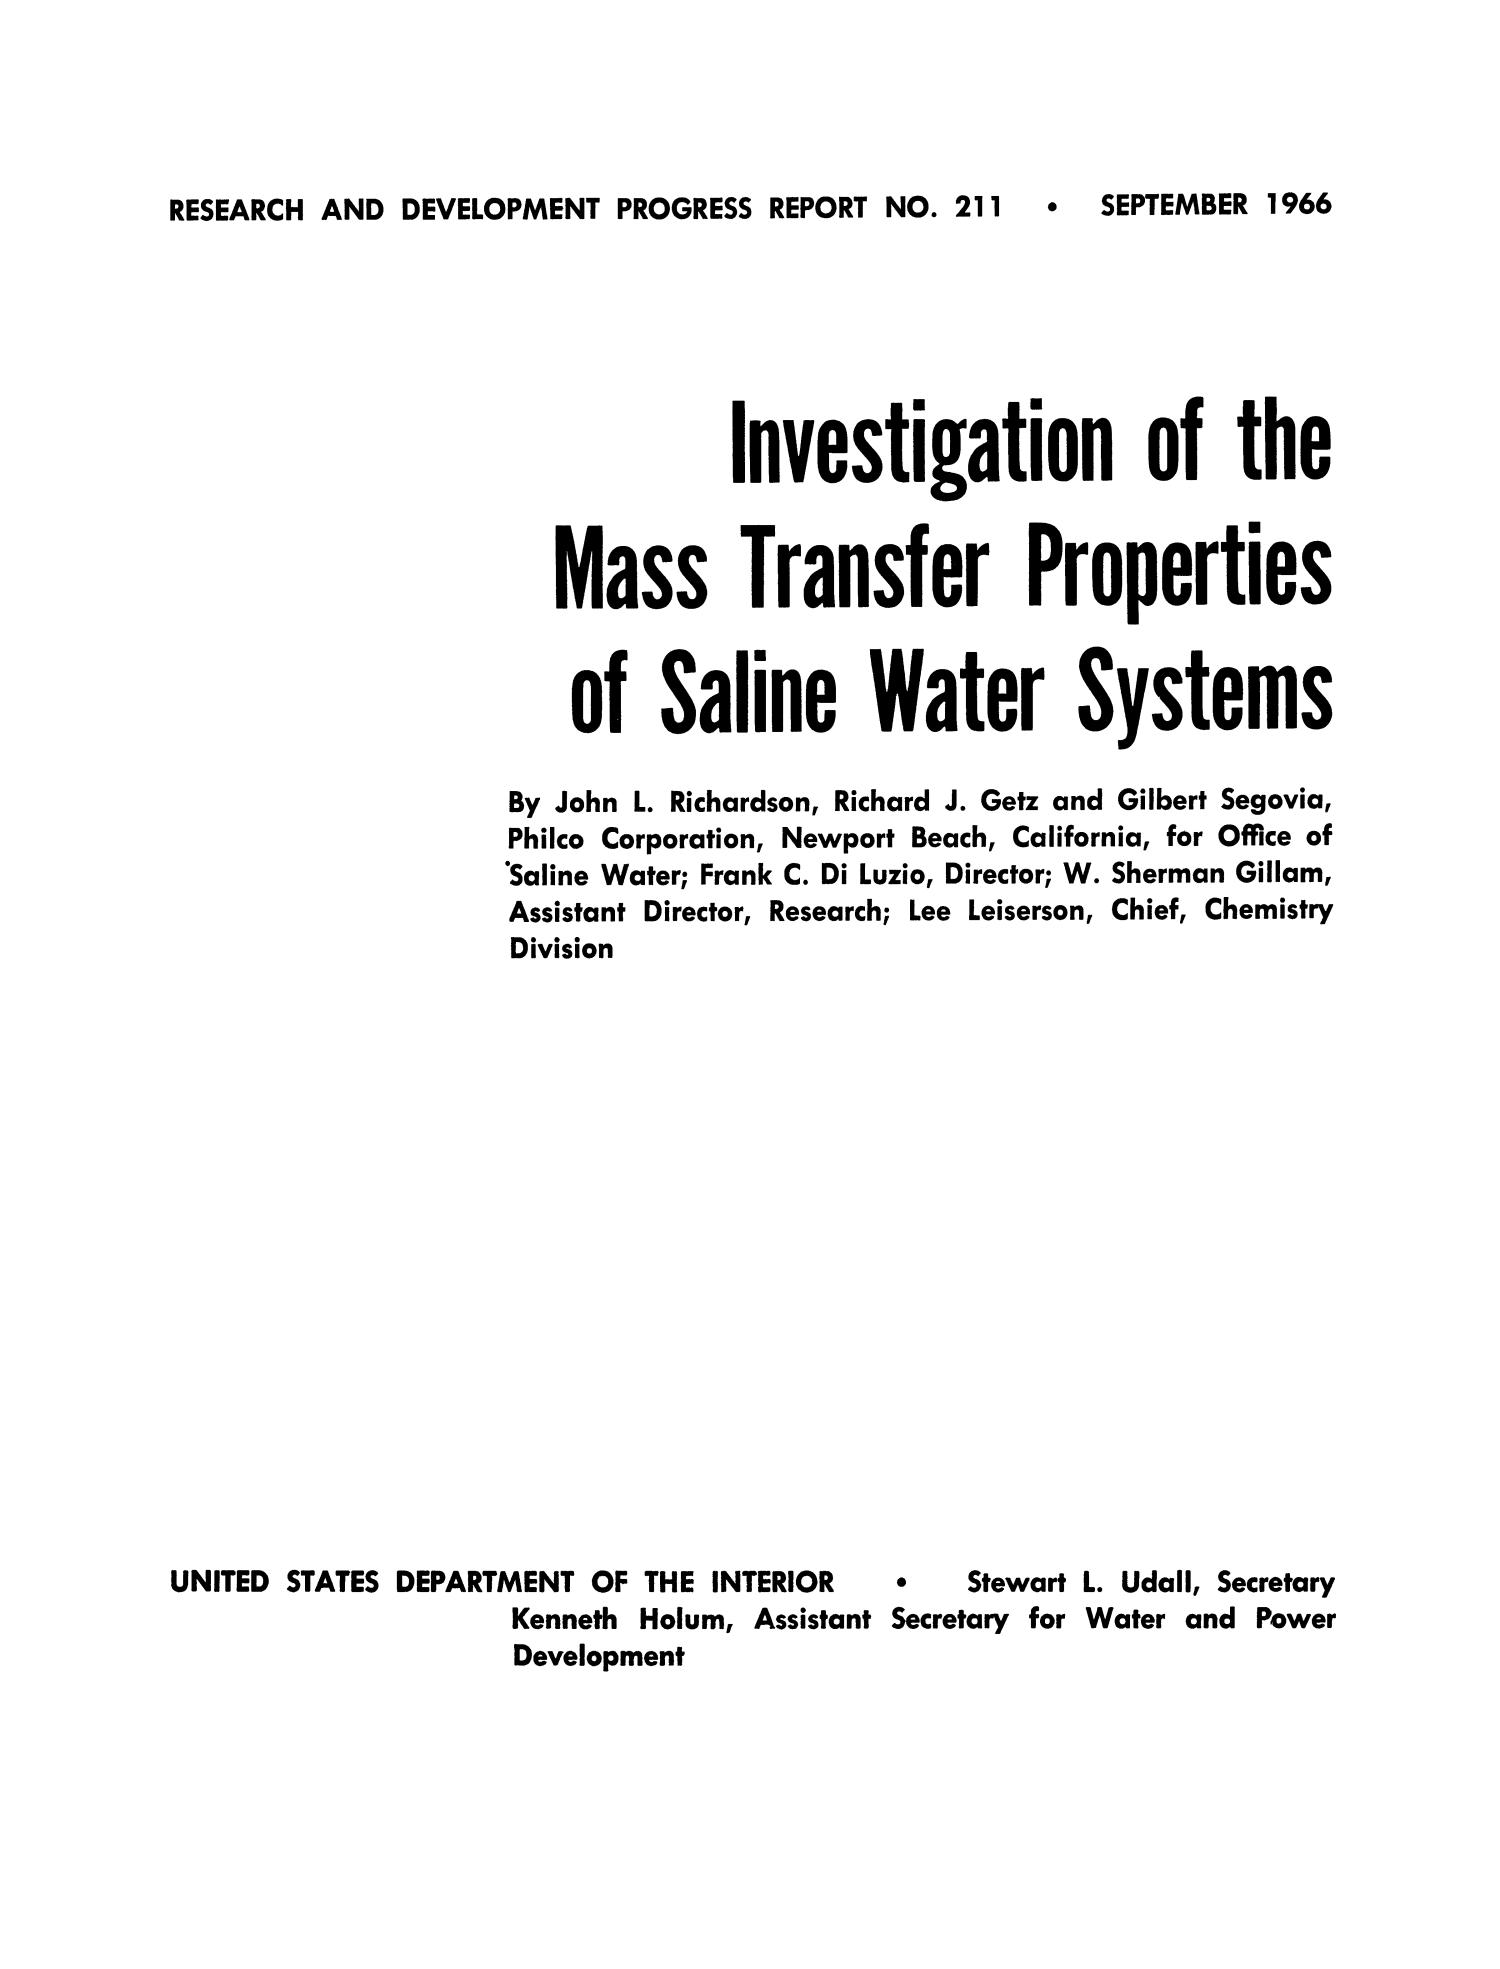 Investigation of the Mass Transfer Properties of Saline Water Systems
                                                
                                                    II
                                                